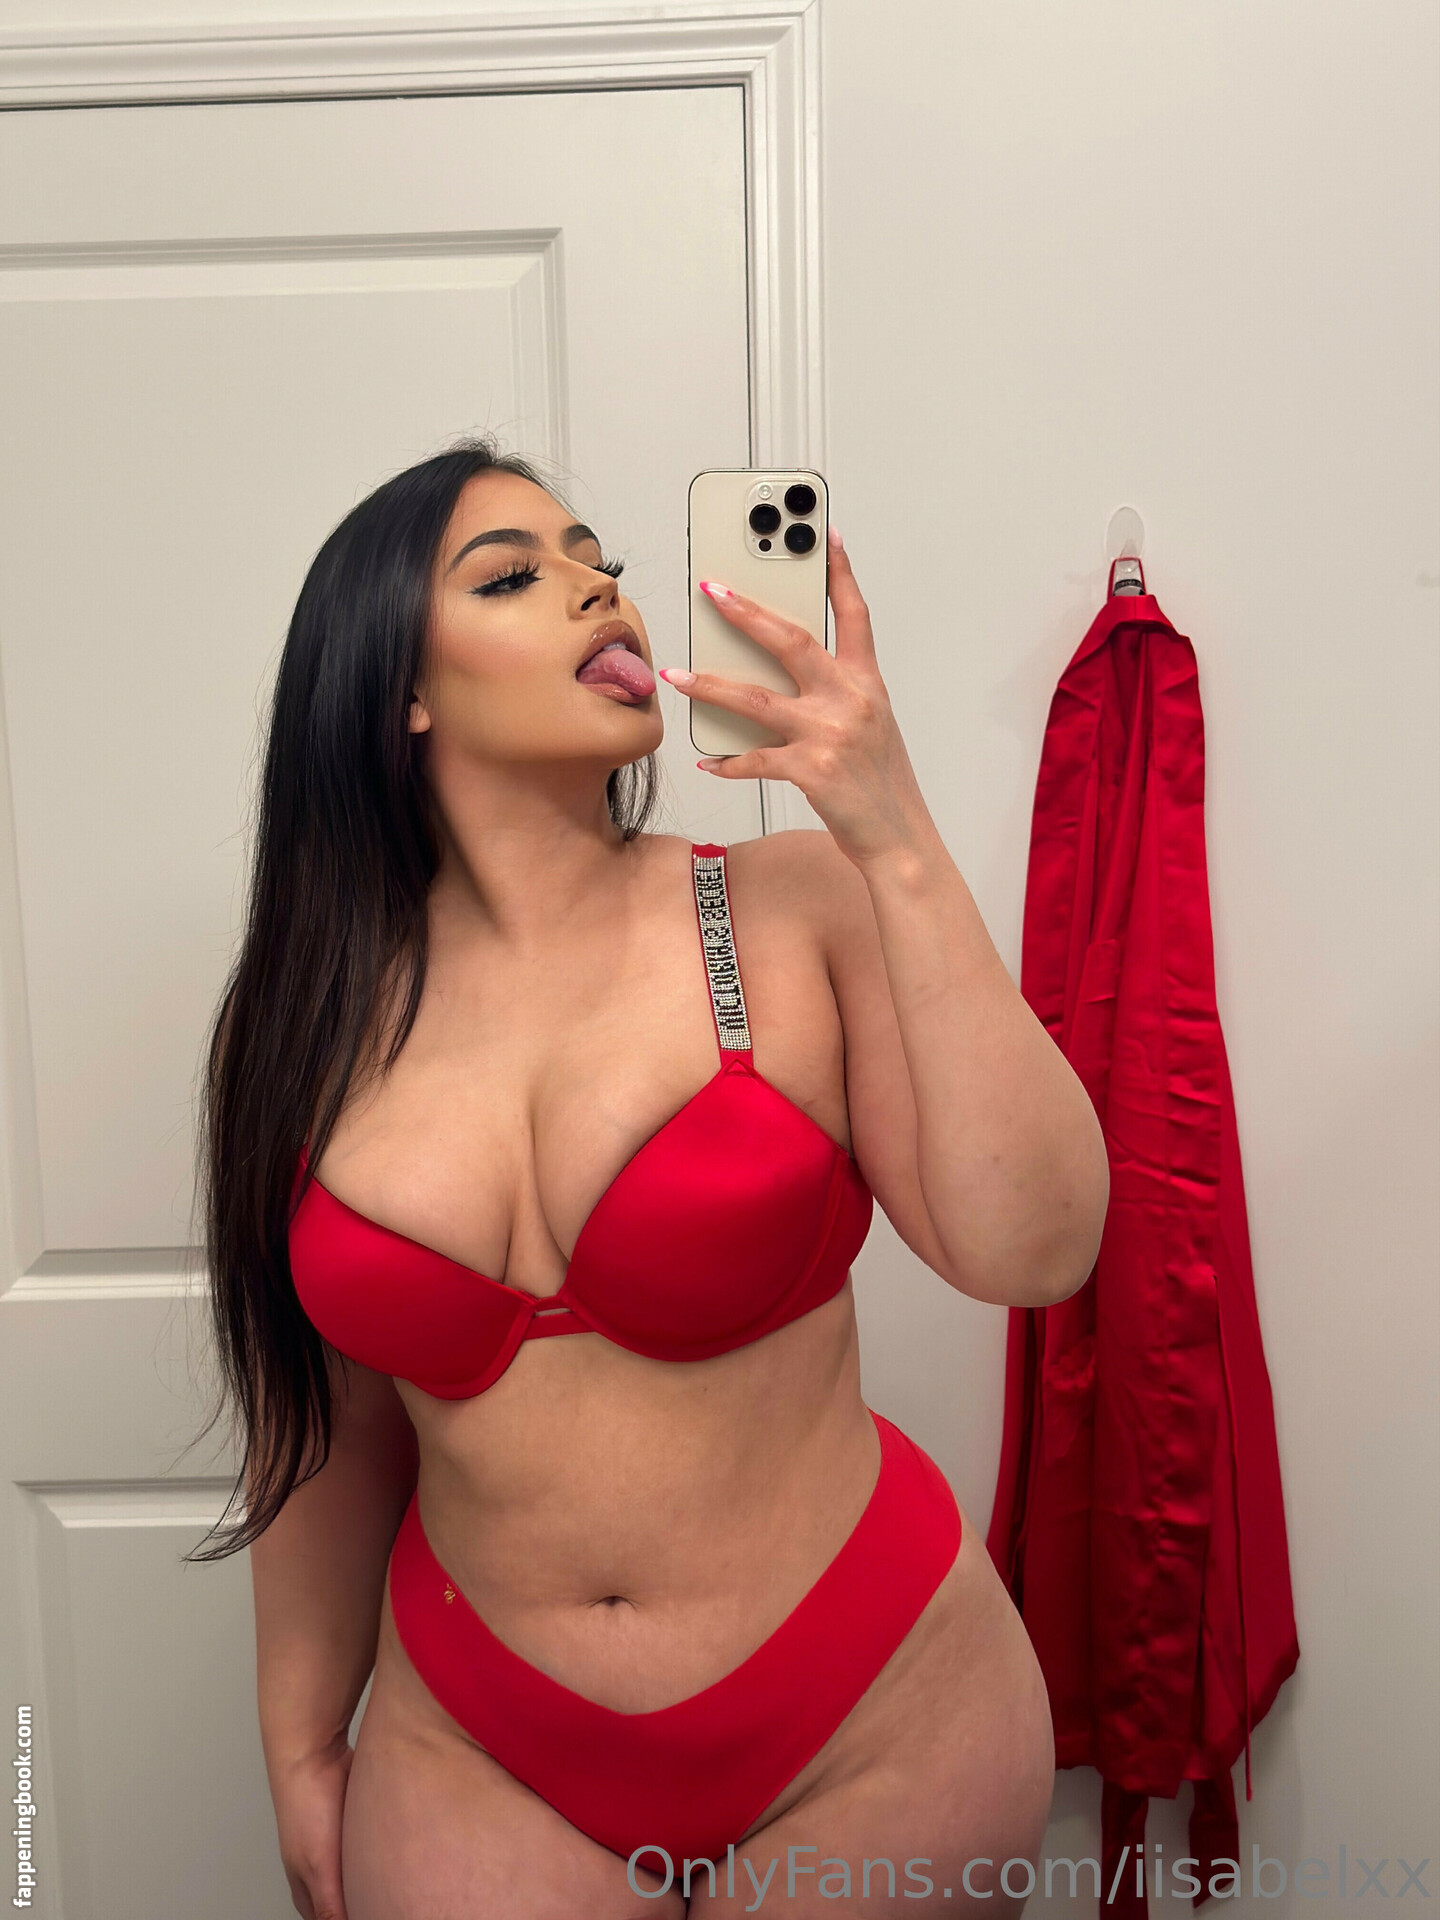 _isabelxx Nude OnlyFans Leaks